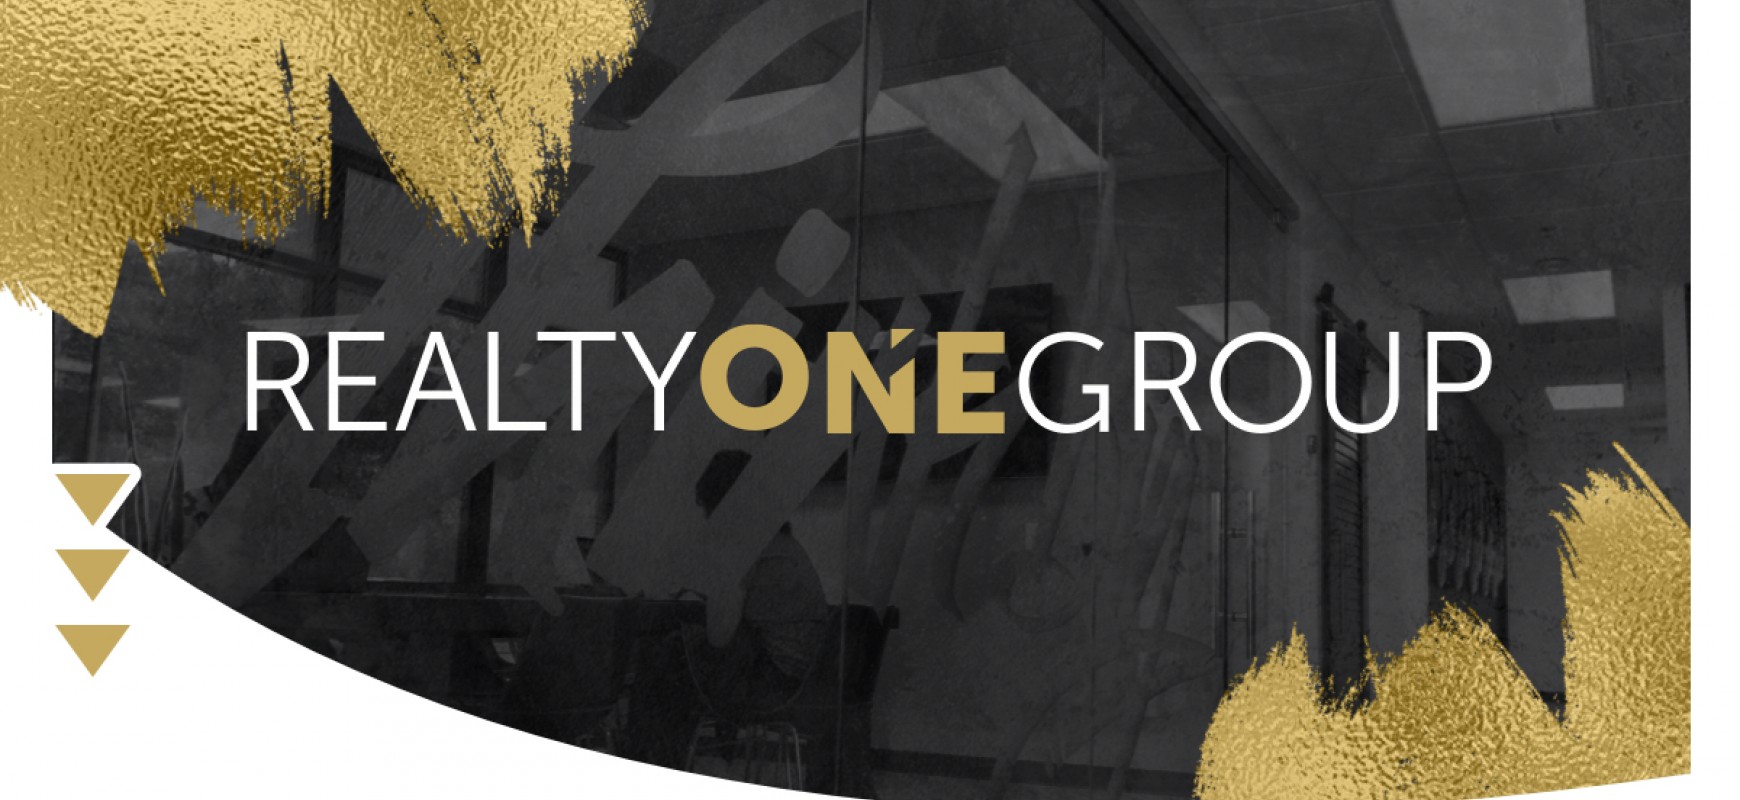 Realty ONE Group Proven be to be a recession-proof Franchisor image 